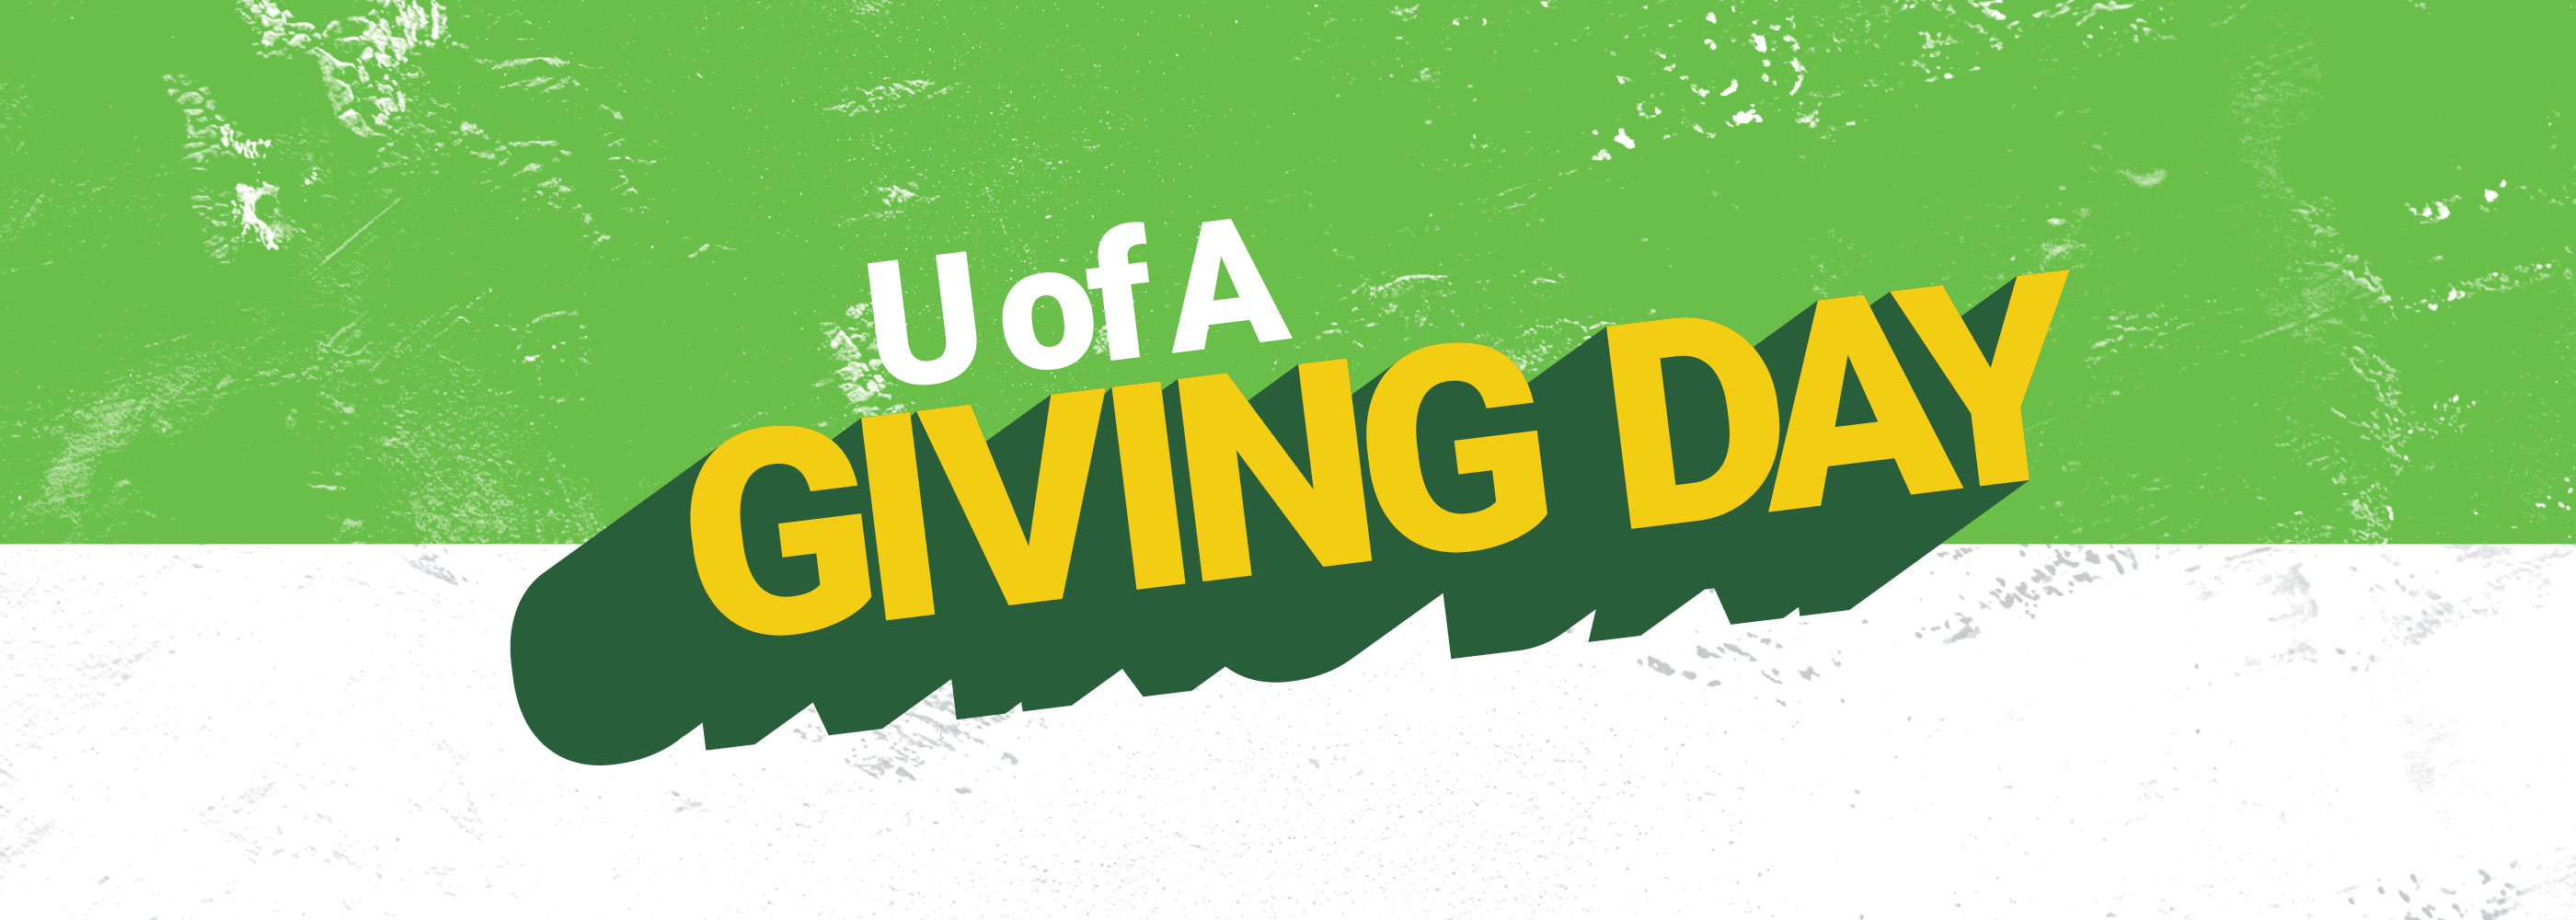 U of A Giving Day